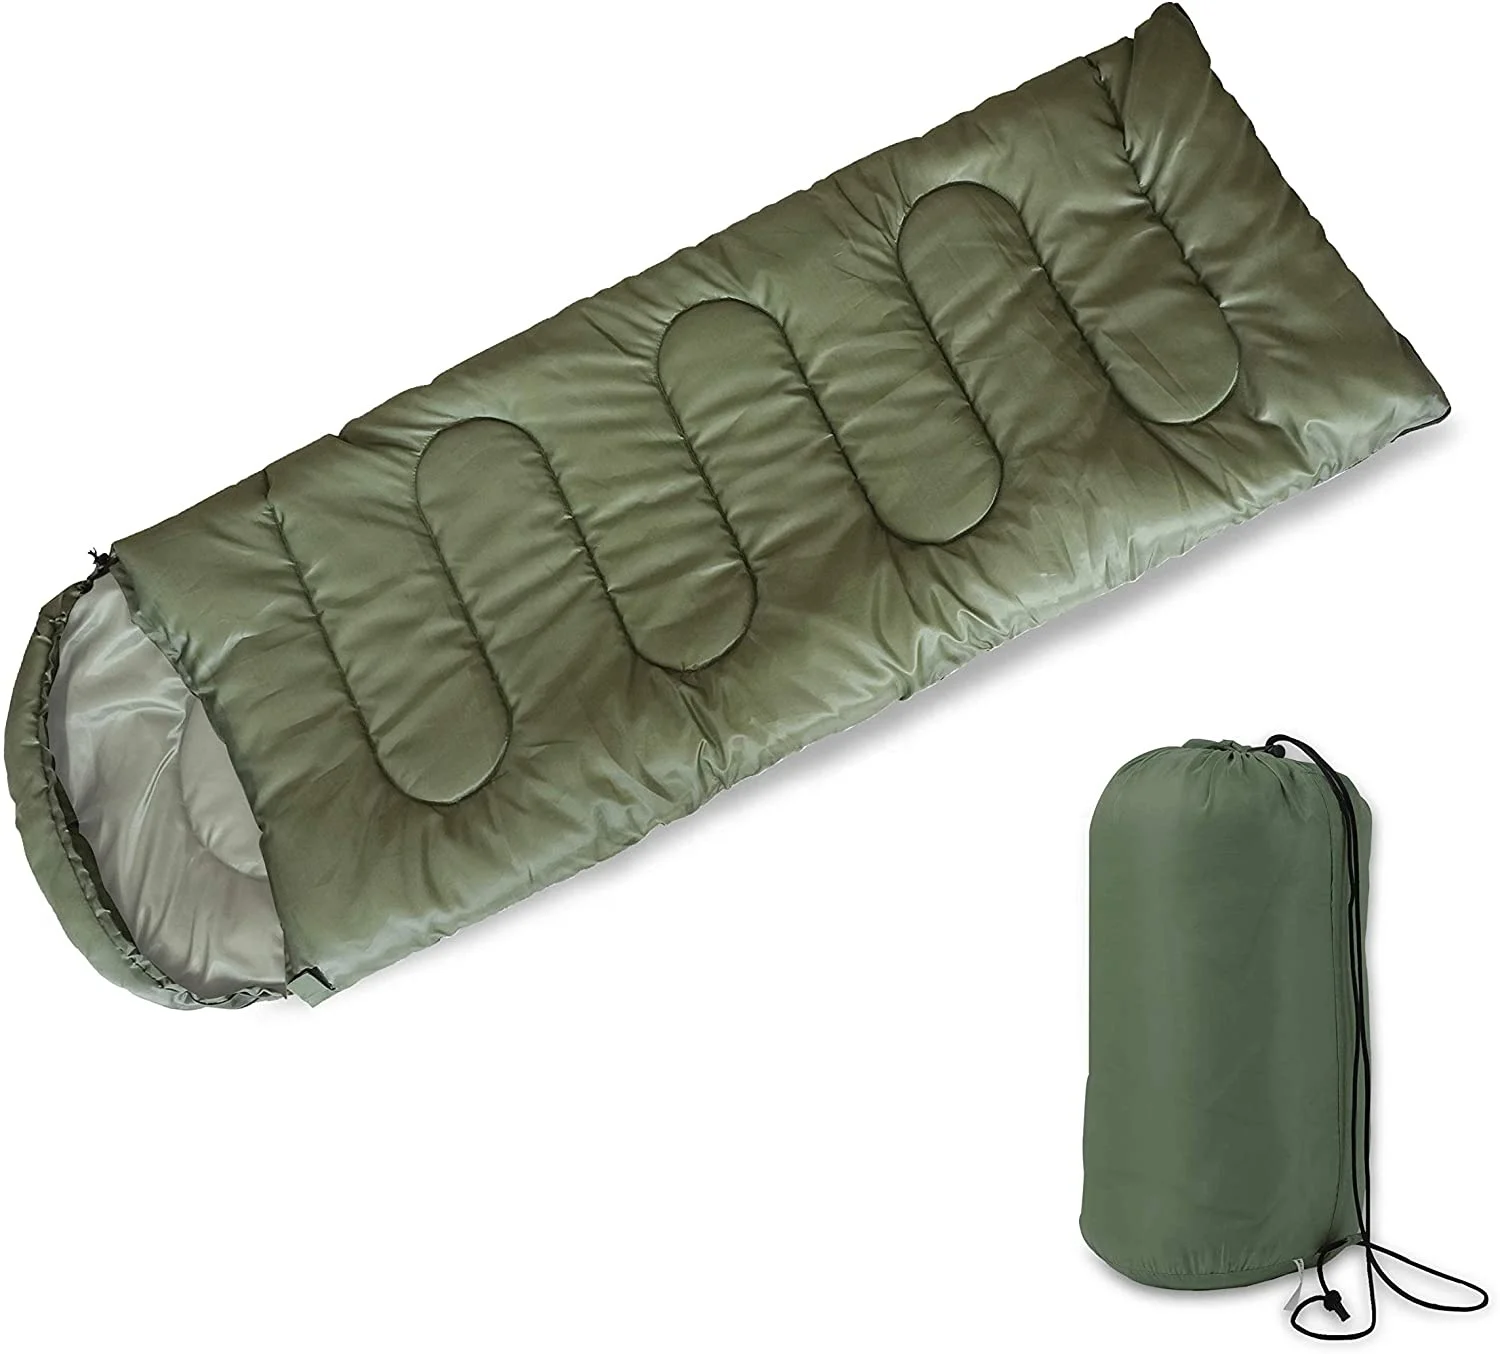 

Camping Sleeping Bag 3 Seasons Warm & Cool Weather Lightweight for Adults and Kids Perfect for Camping Hiking Traveling